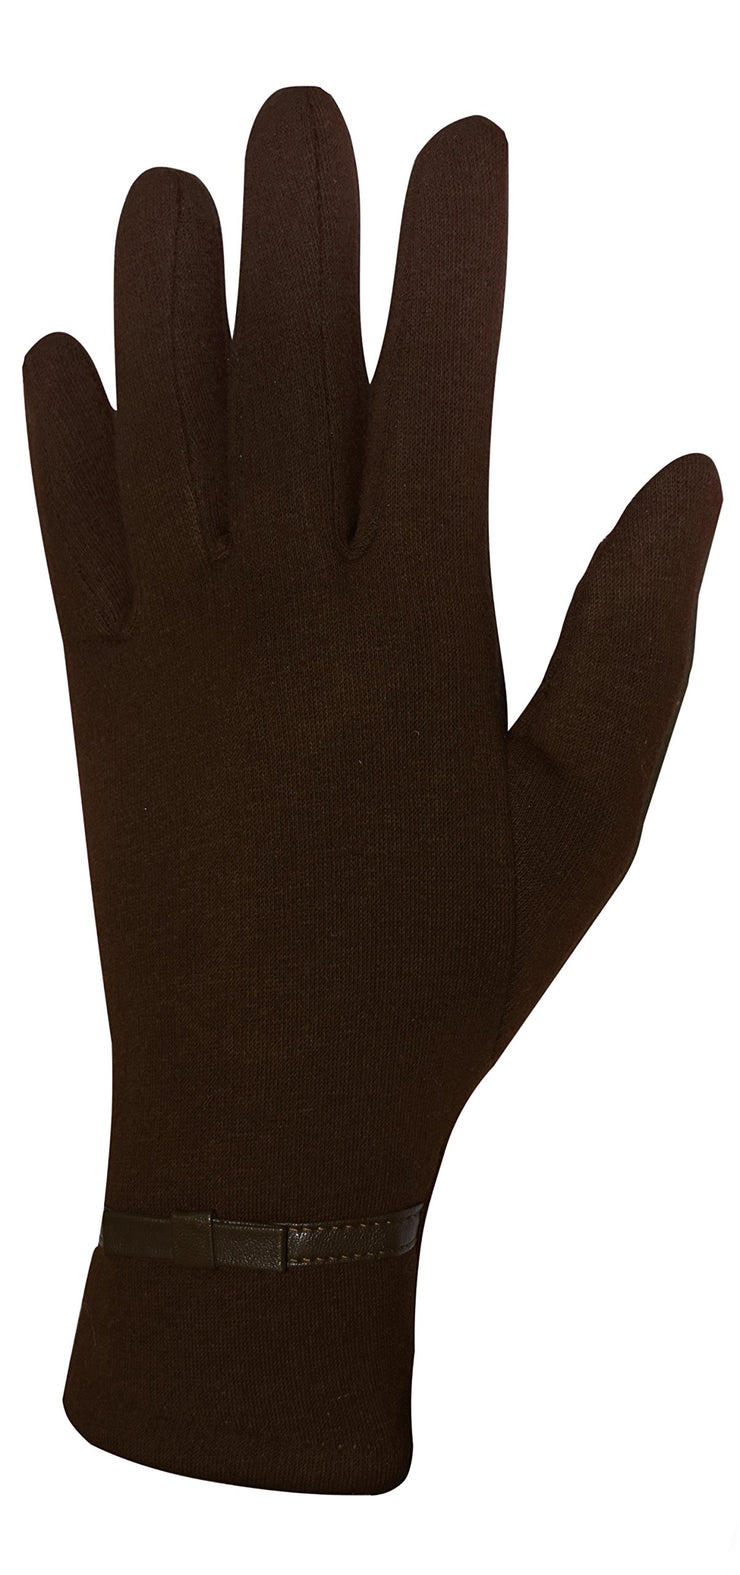 Womens Touch Screen Fleece Lined Belted Winter Gloves Warm Wear Belted Brown, One Size